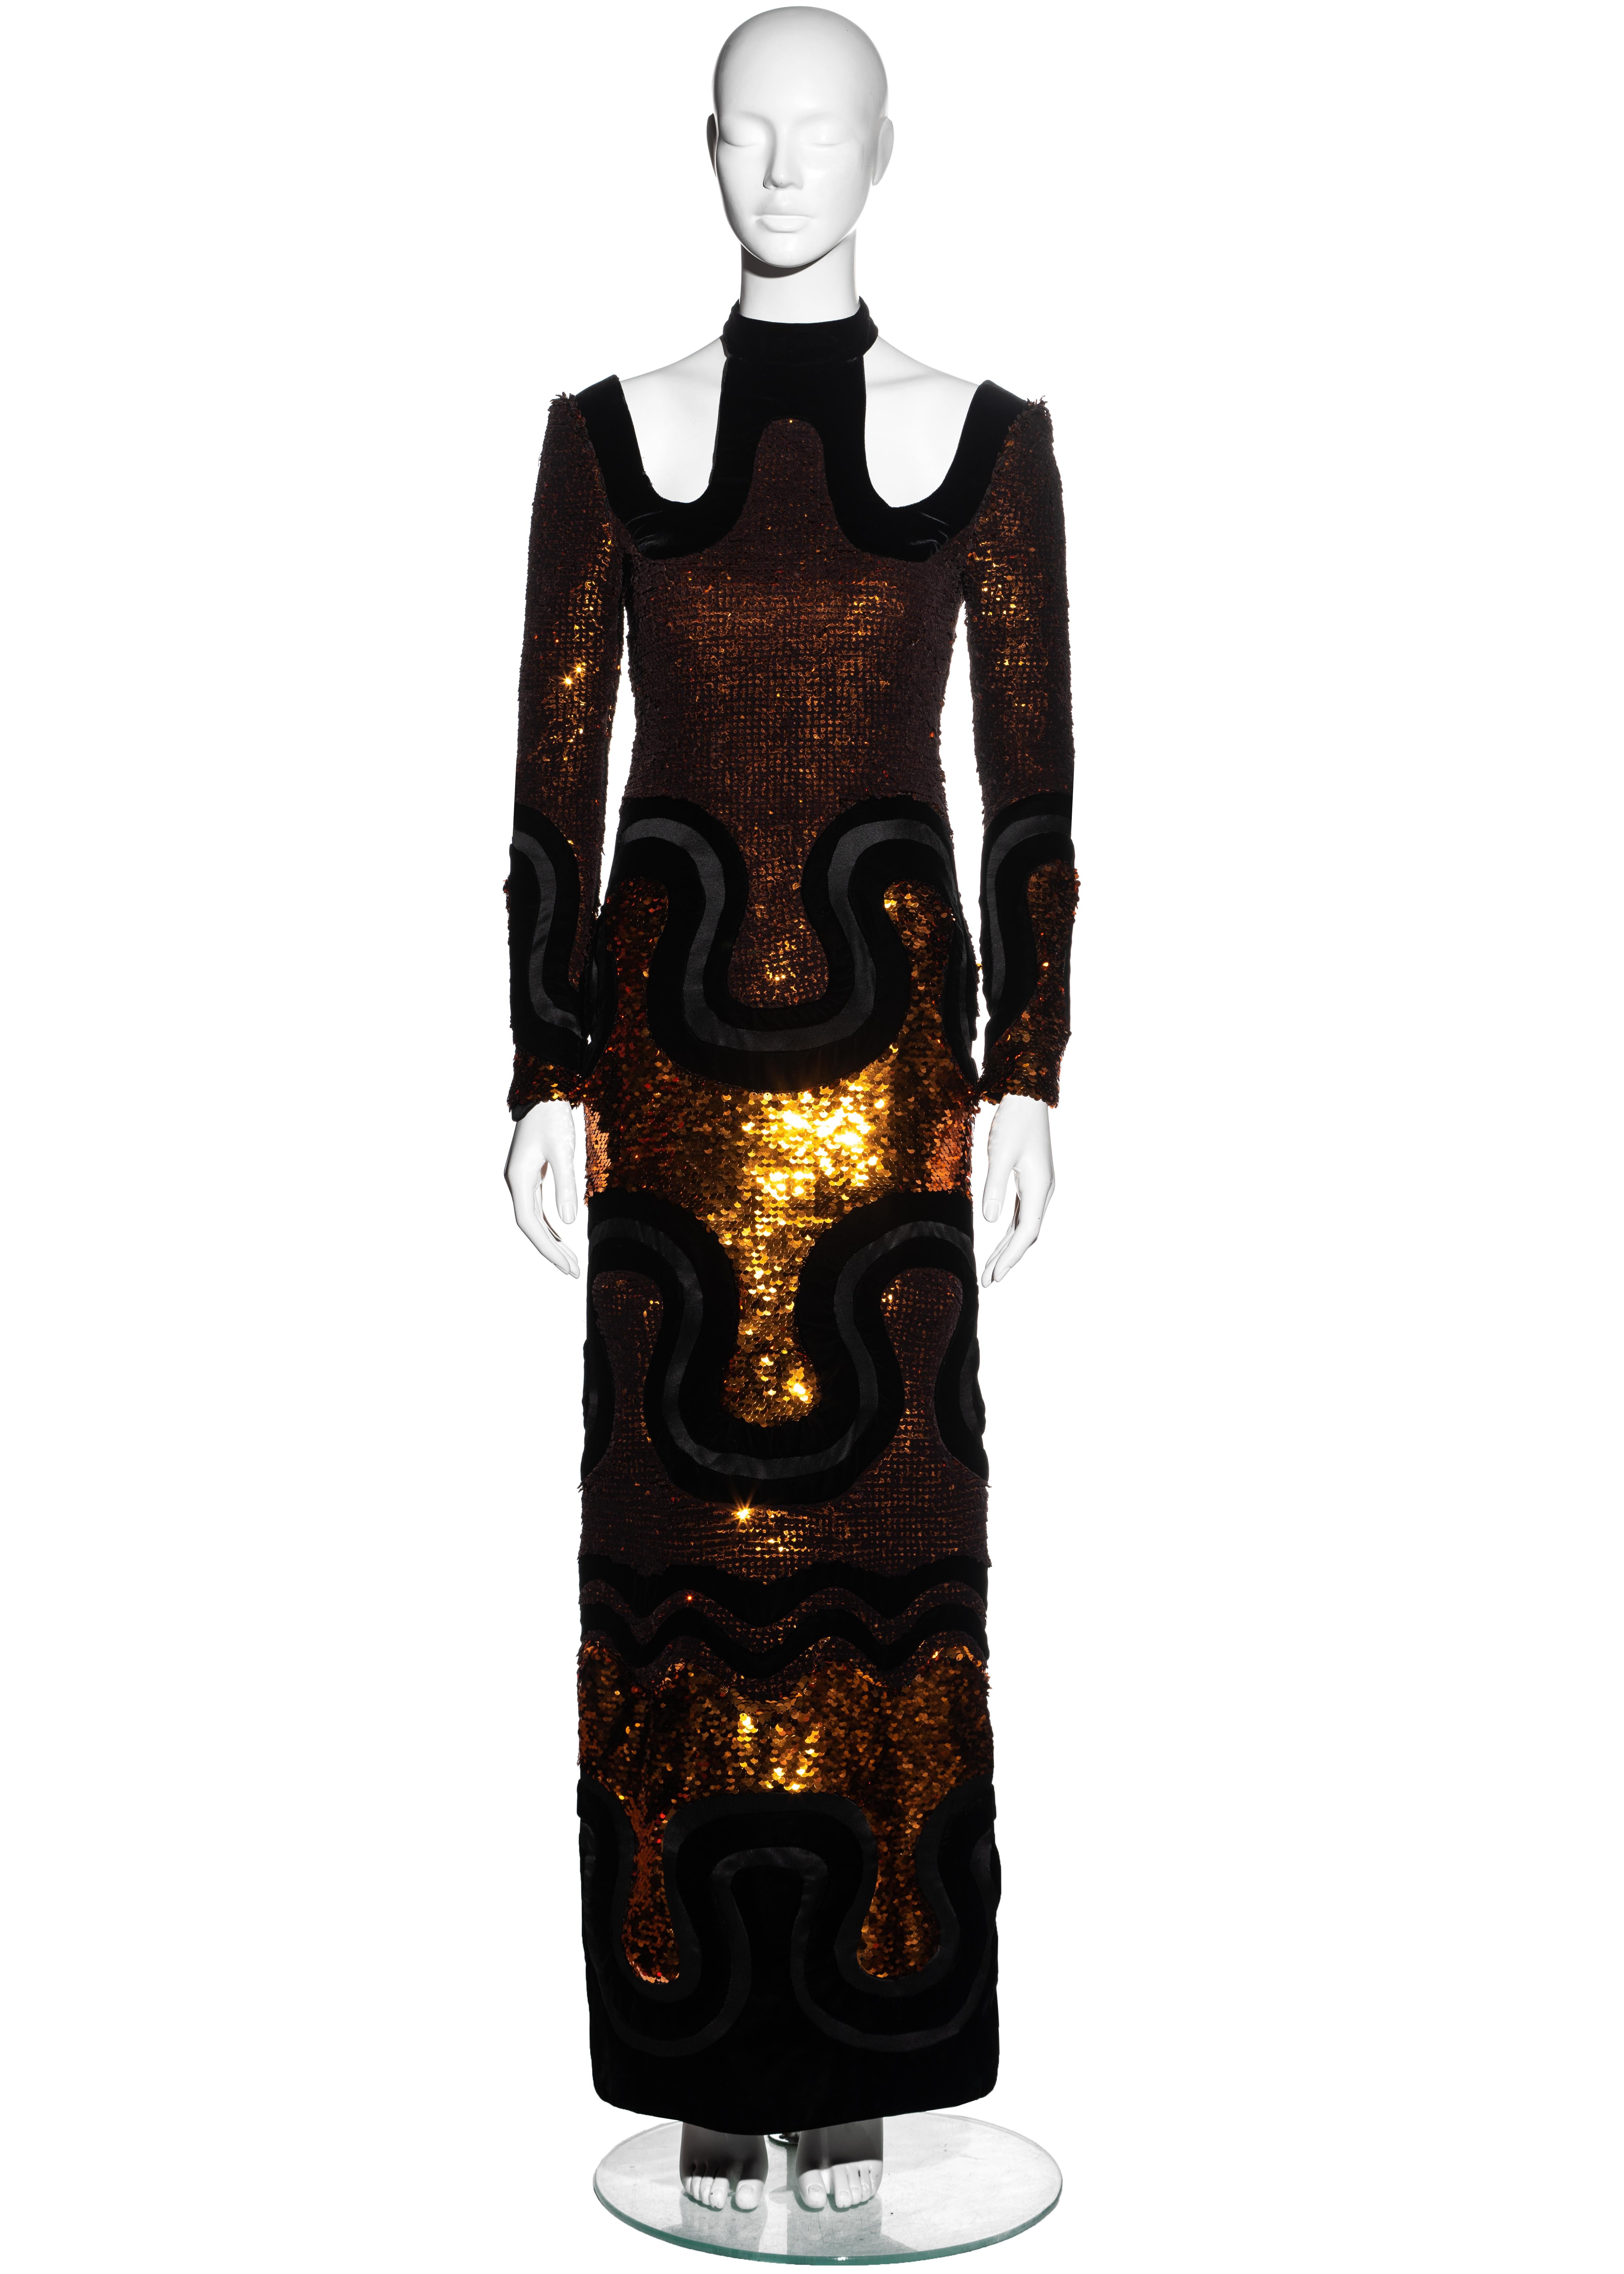 ▪ Tom Ford copper sequin evening maxi dress 
▪ Undulating velvet and silk panels
▪ Cut outs at shoulders 
▪ High leg slit at centre back
▪ IT 38 - FR 34 - UK 6 - US 2
▪ Fall-Winter 2015